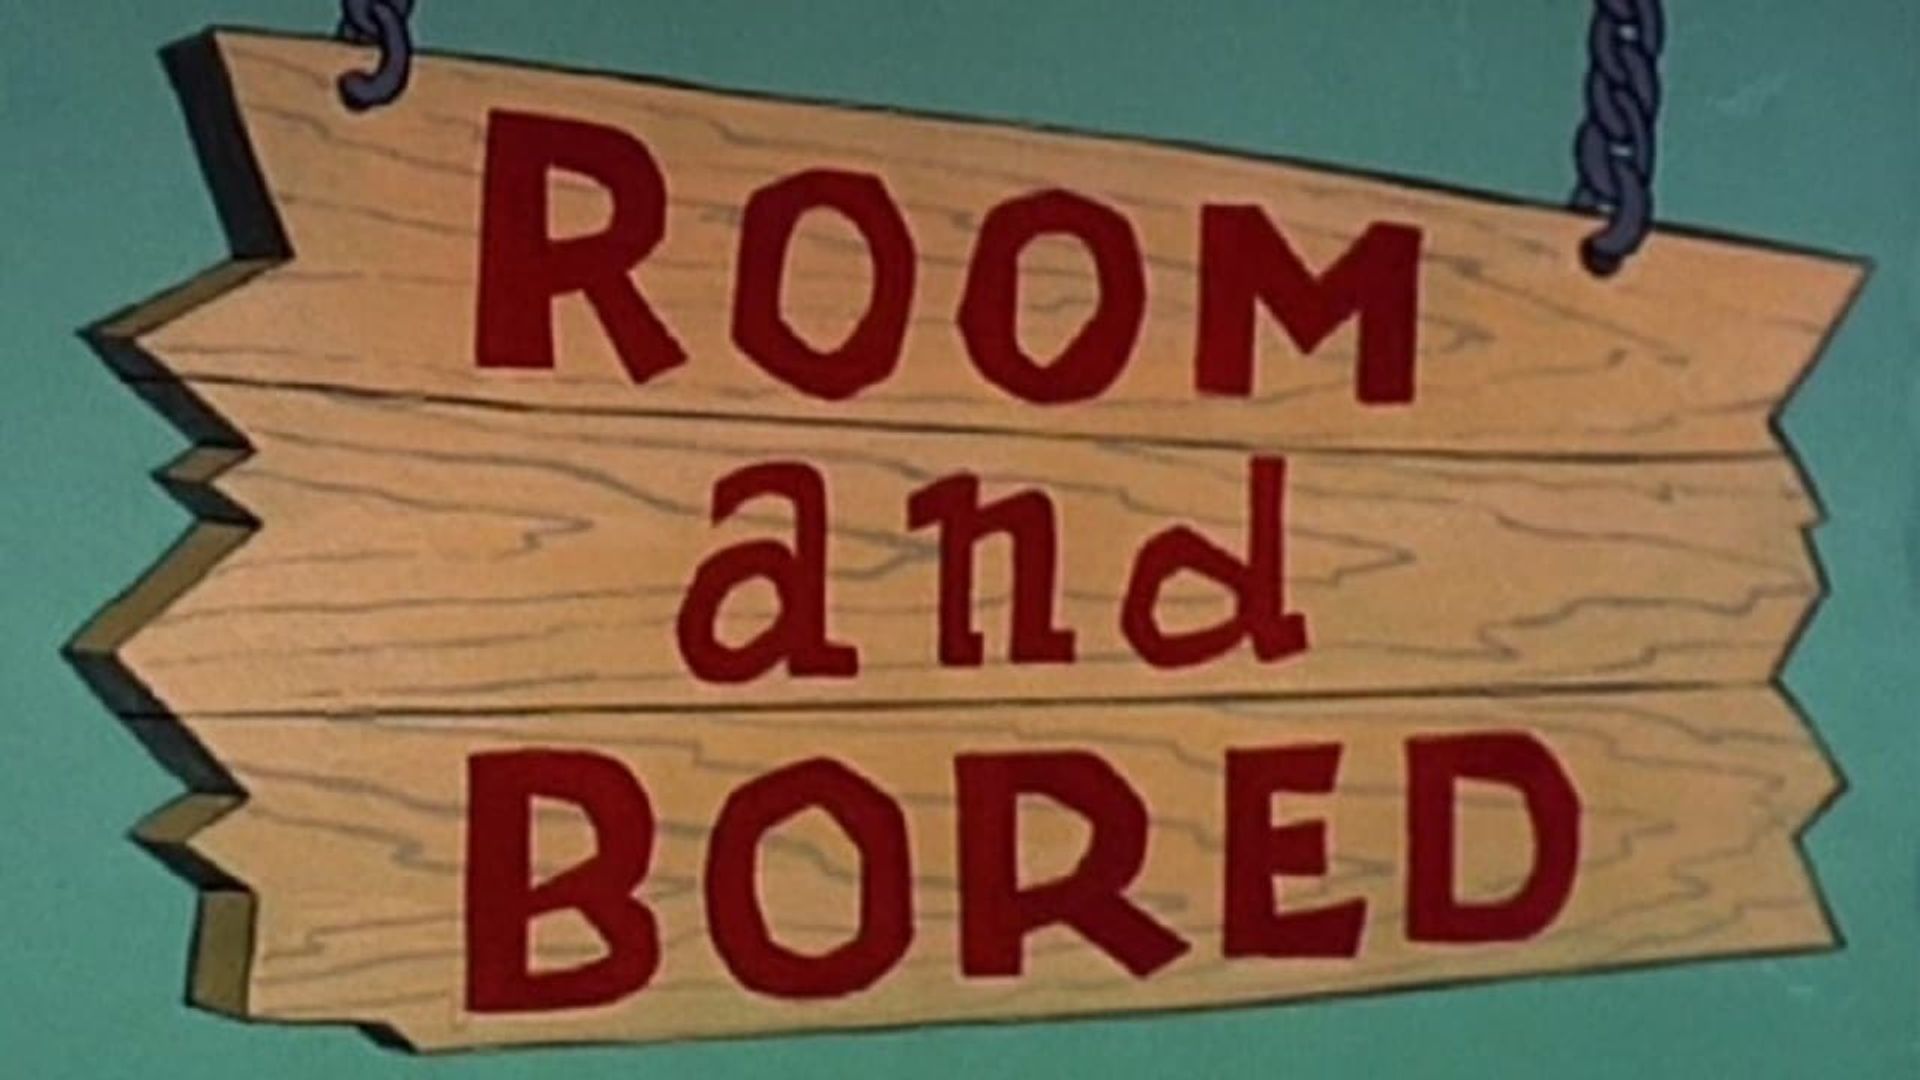 Room and Bored background